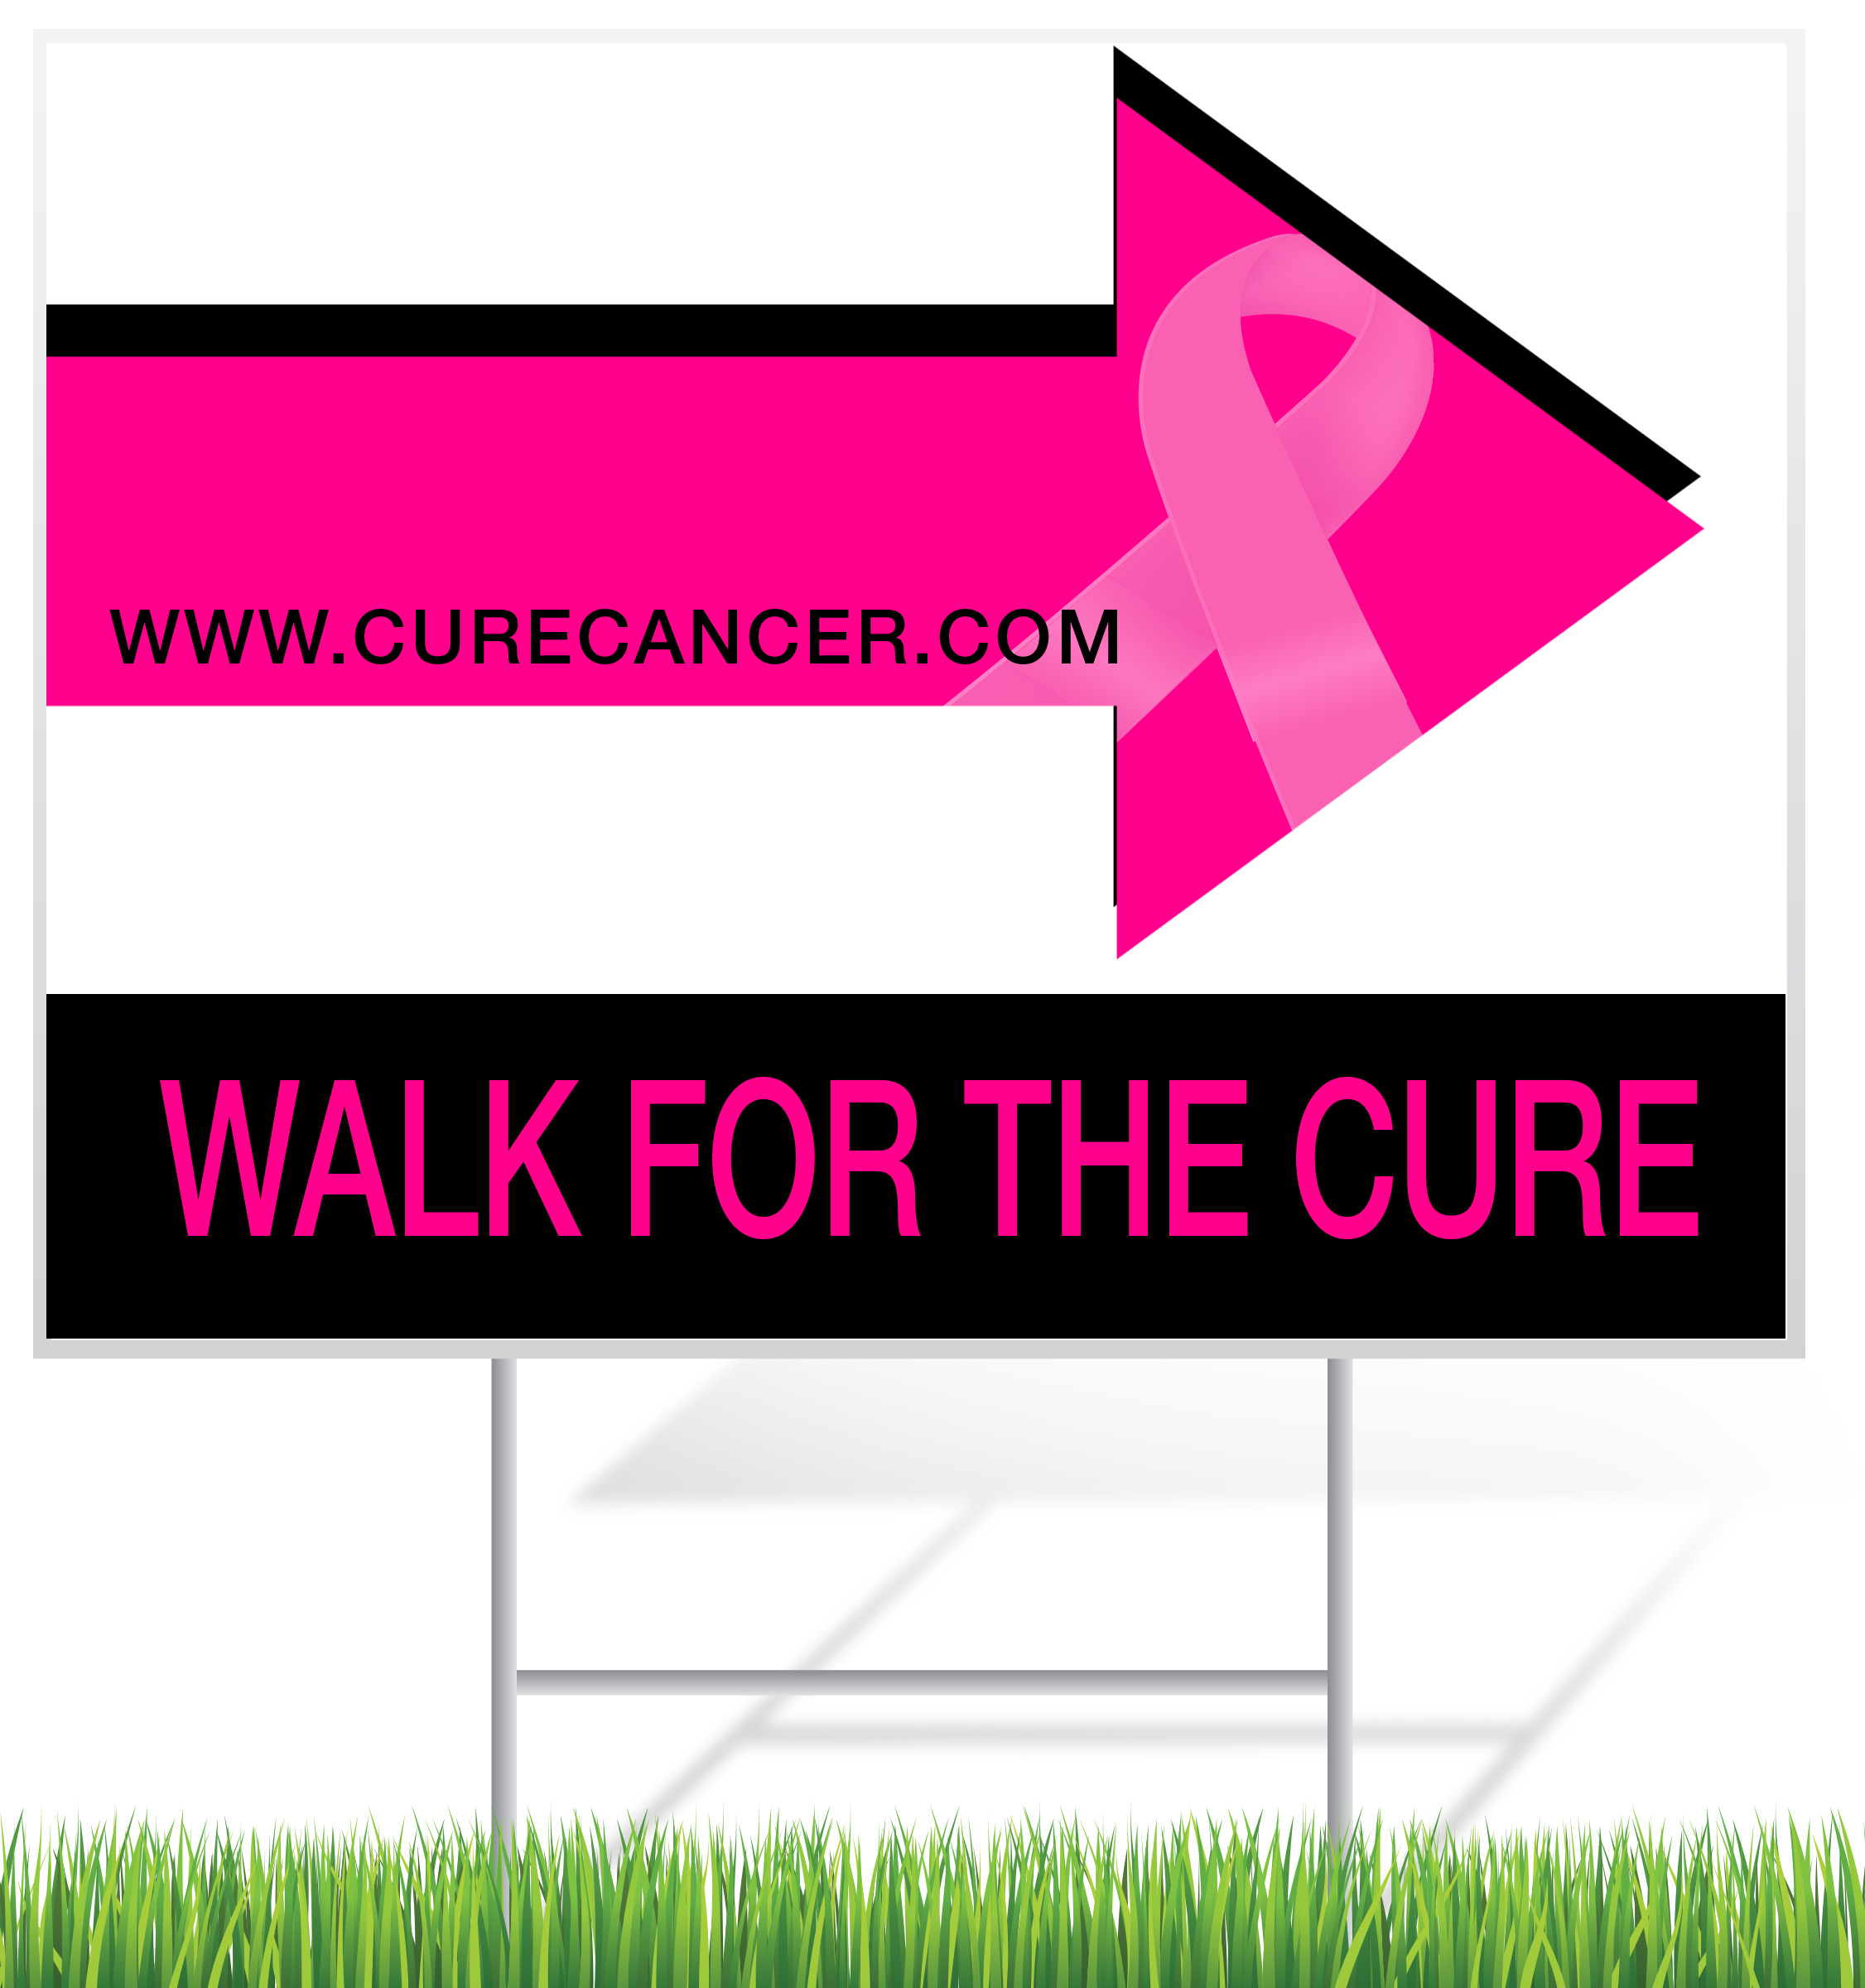 Breast Cancer Awareness Yard Sign Sample | Banners.com